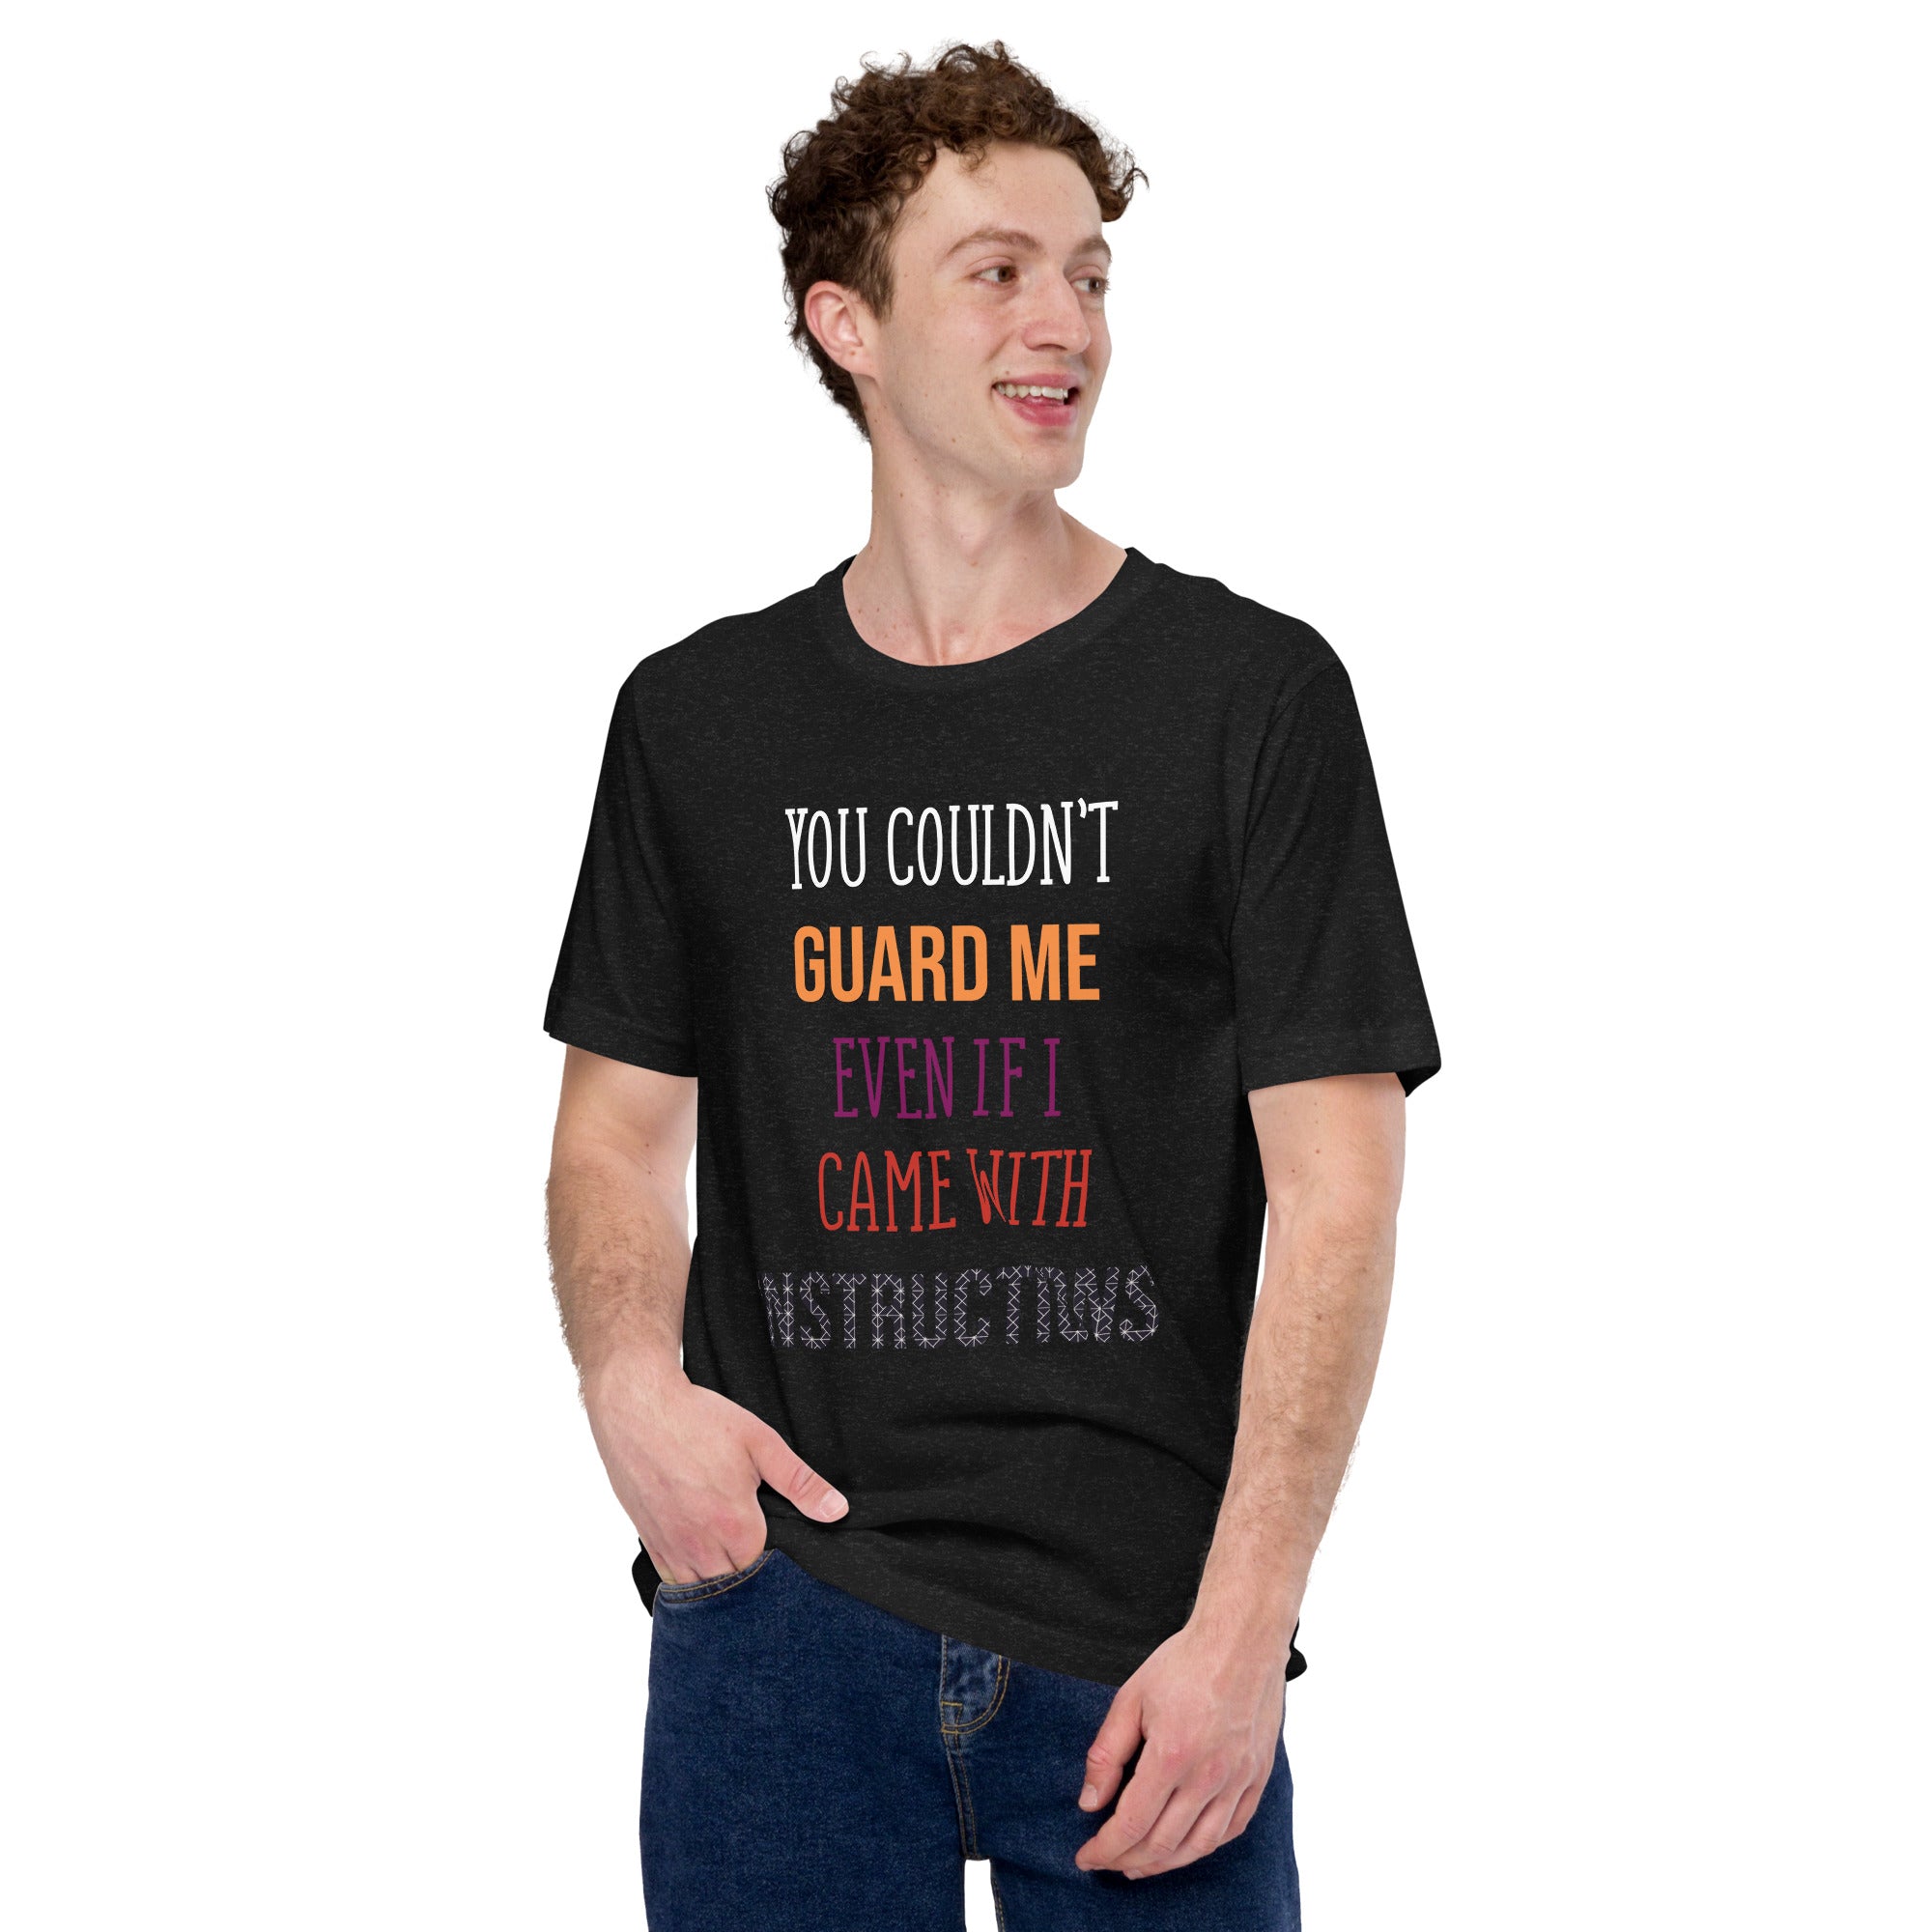 Unisex "Can't Guard Me" Tee